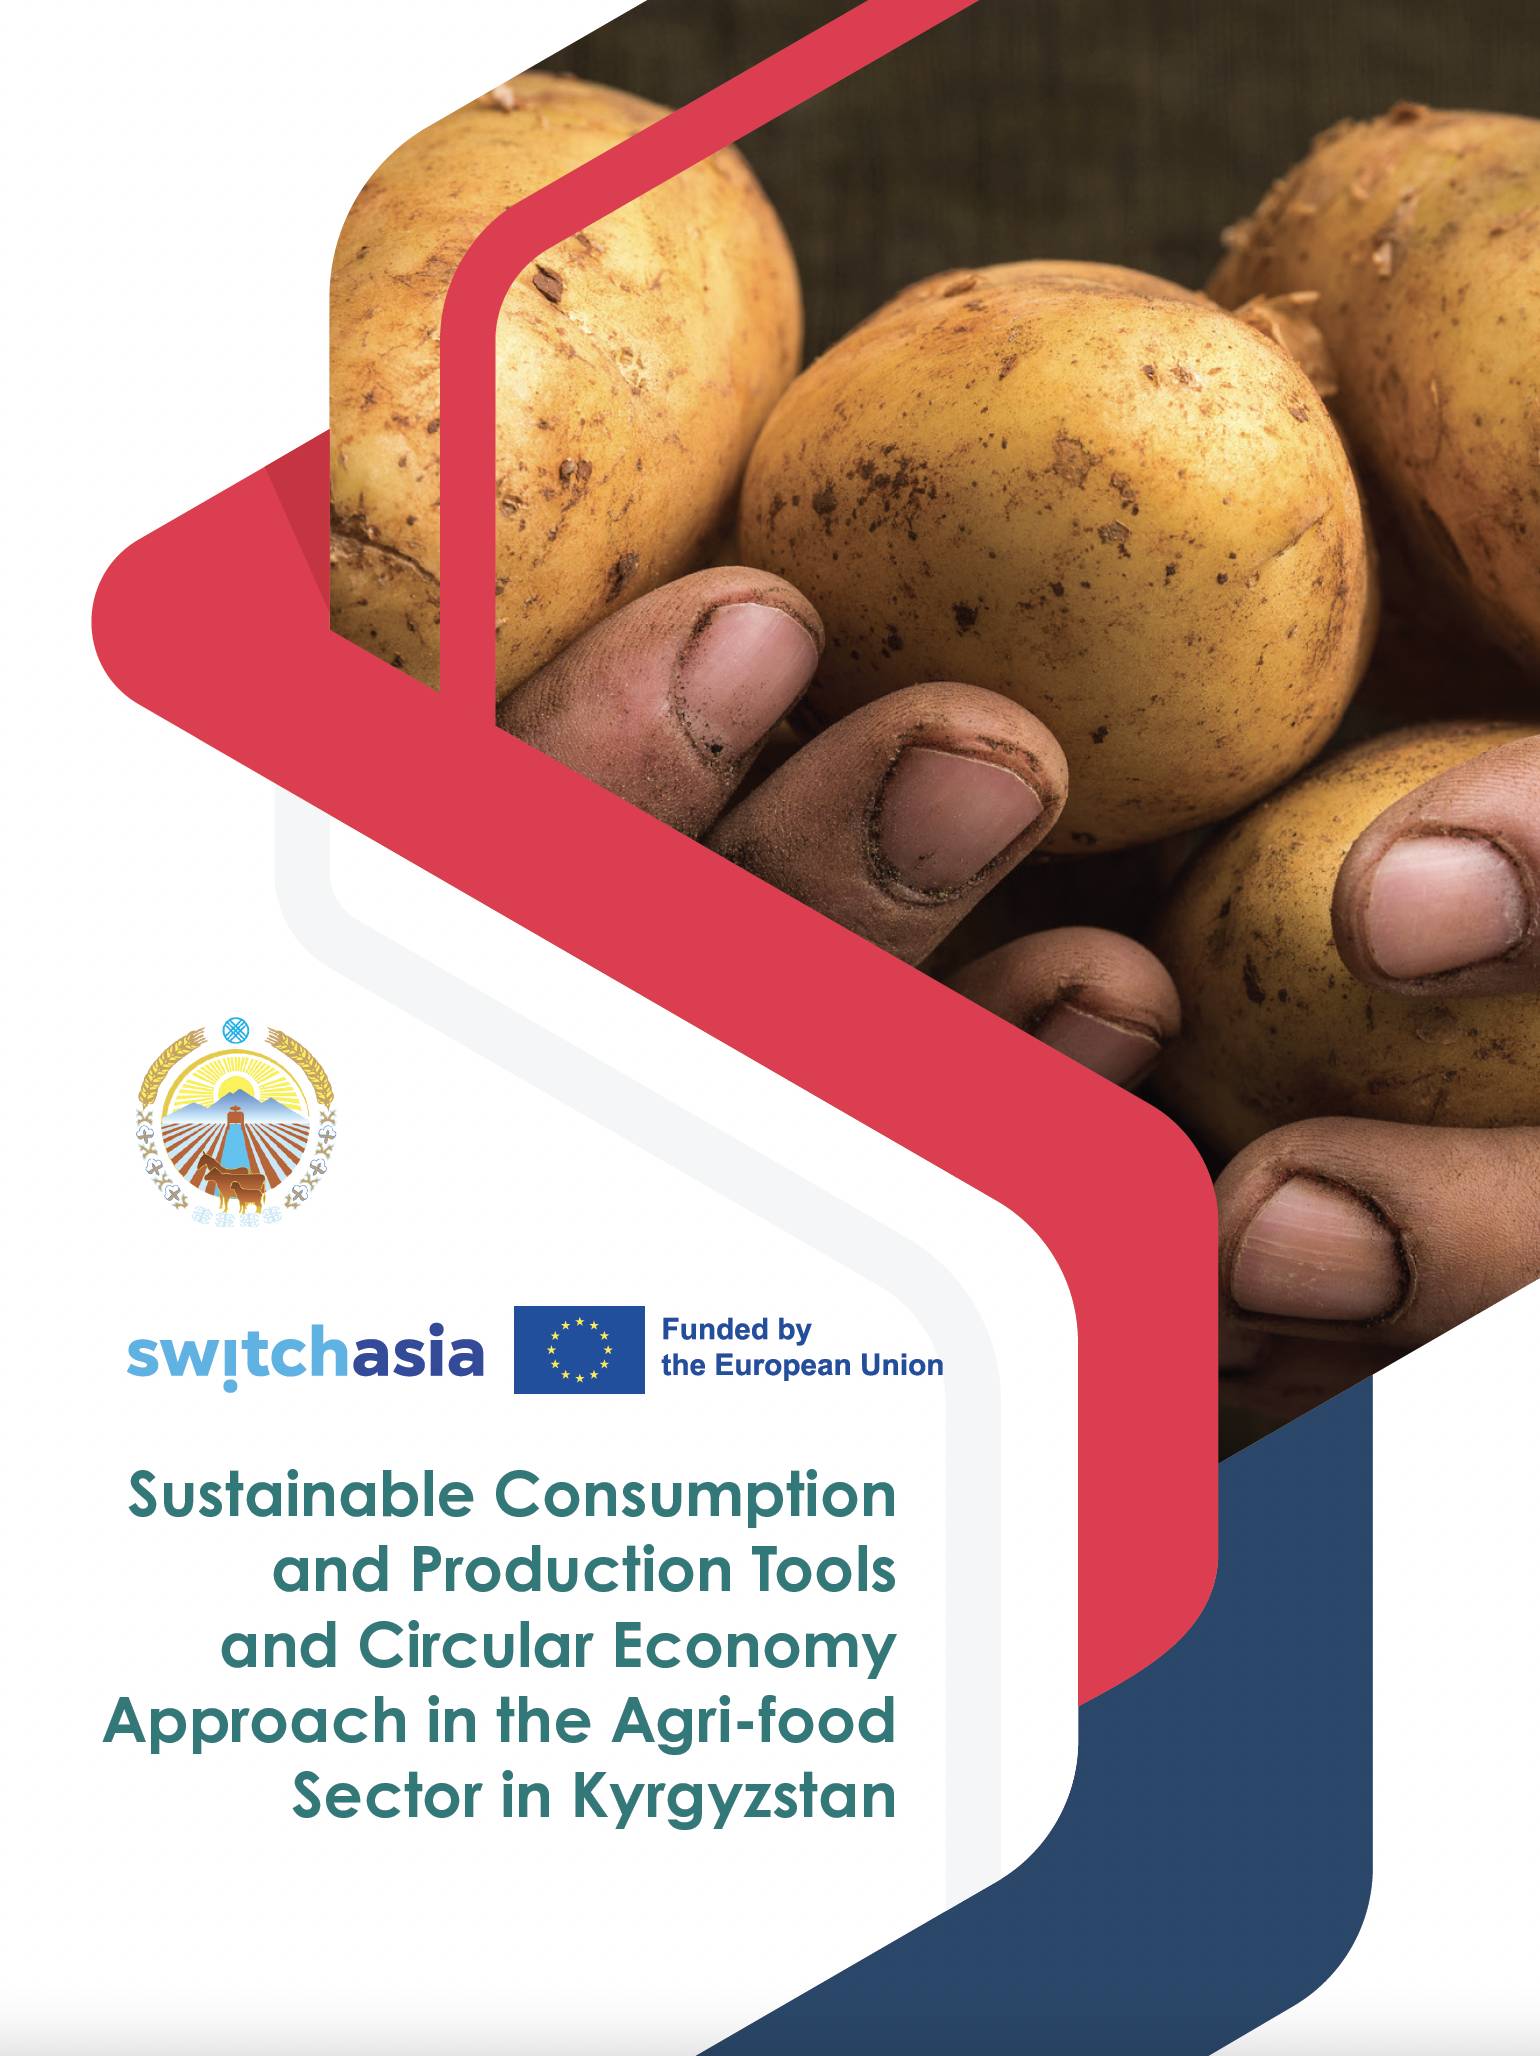 Sustainable Consumption and Production Tools and Circular Economy Approach in the Agri-food Sector in Kyrgyzstan